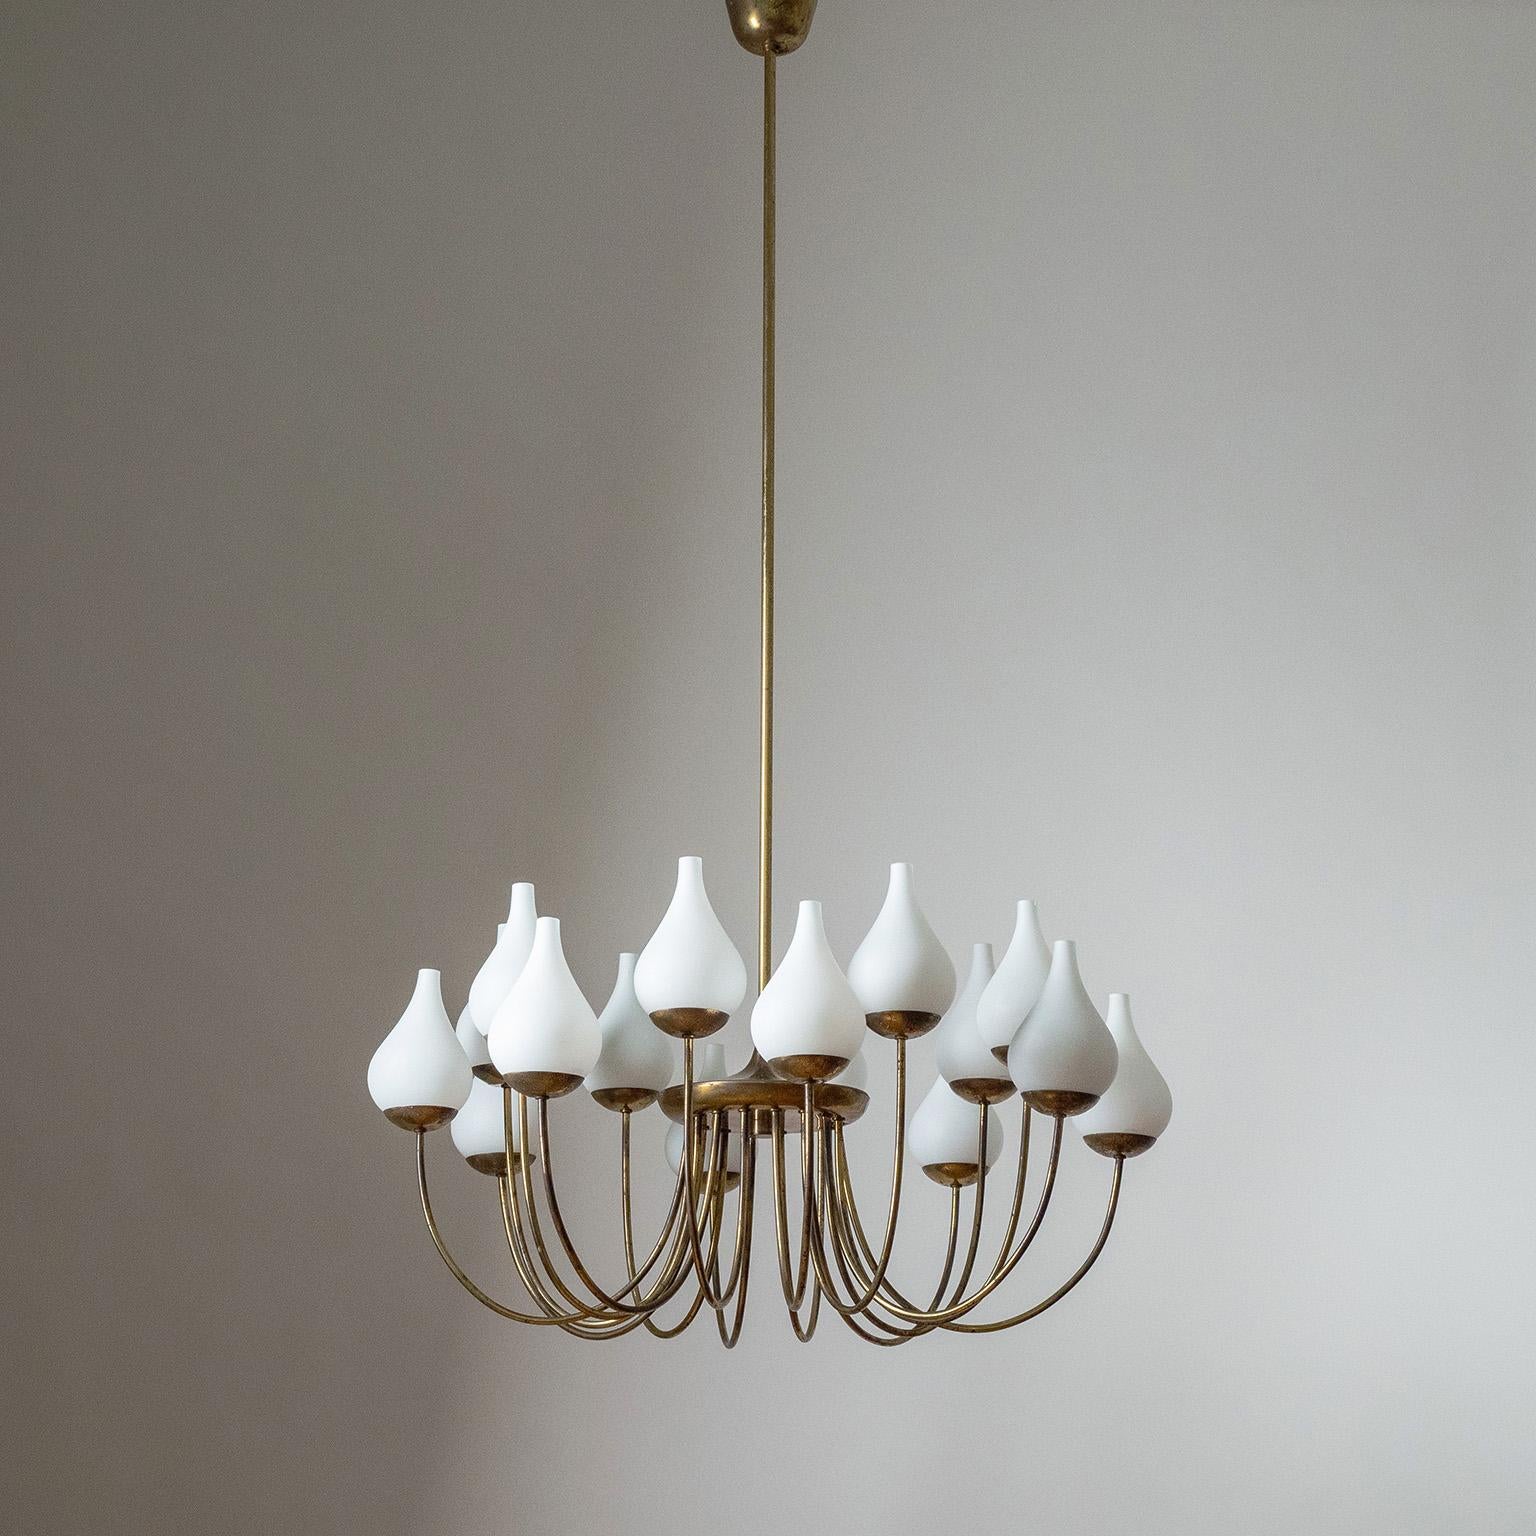 Rare Italian 16-arm brass chandelier from the 1950s. Curved brass arms, each with an onion-shaped satin glass diffuser. Original brass E14 sockets with new wiring.
Measures: Height 146cm (57.5″), Body Height 41cm (16″), Diameter 82cm (32″), Canopy